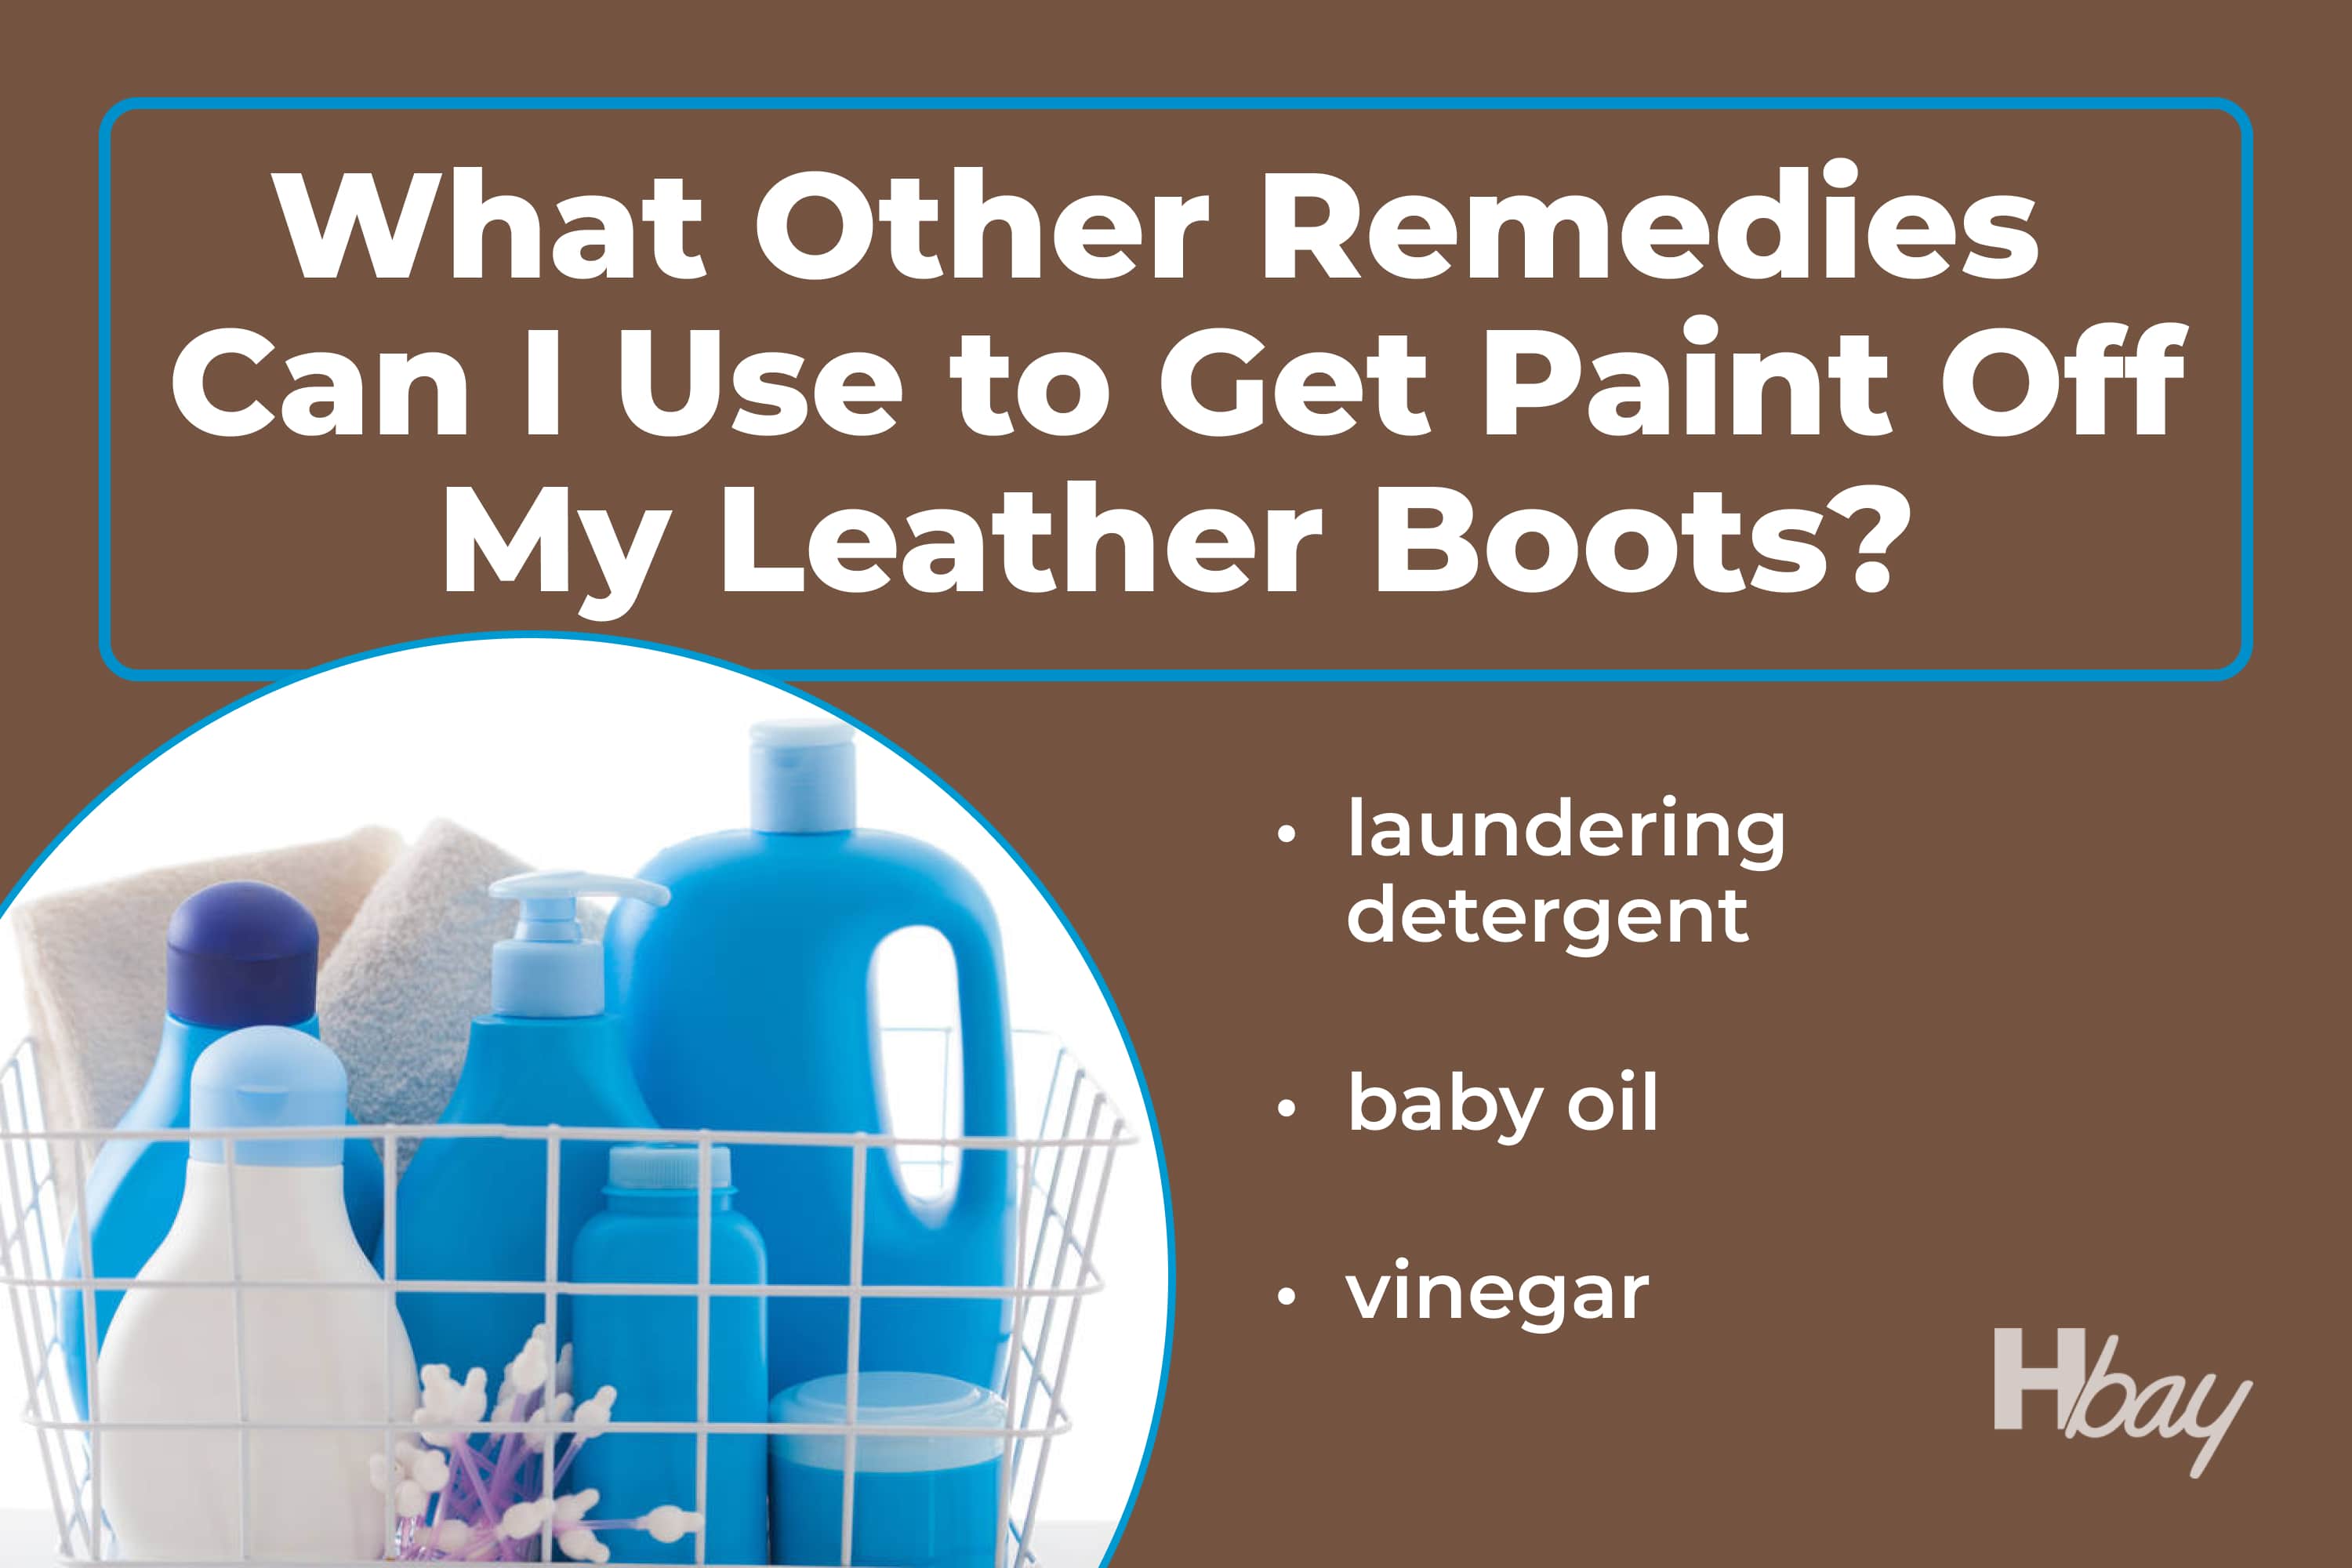 What Other Remedies Can I Use to Get Paint Off My Leather Boots